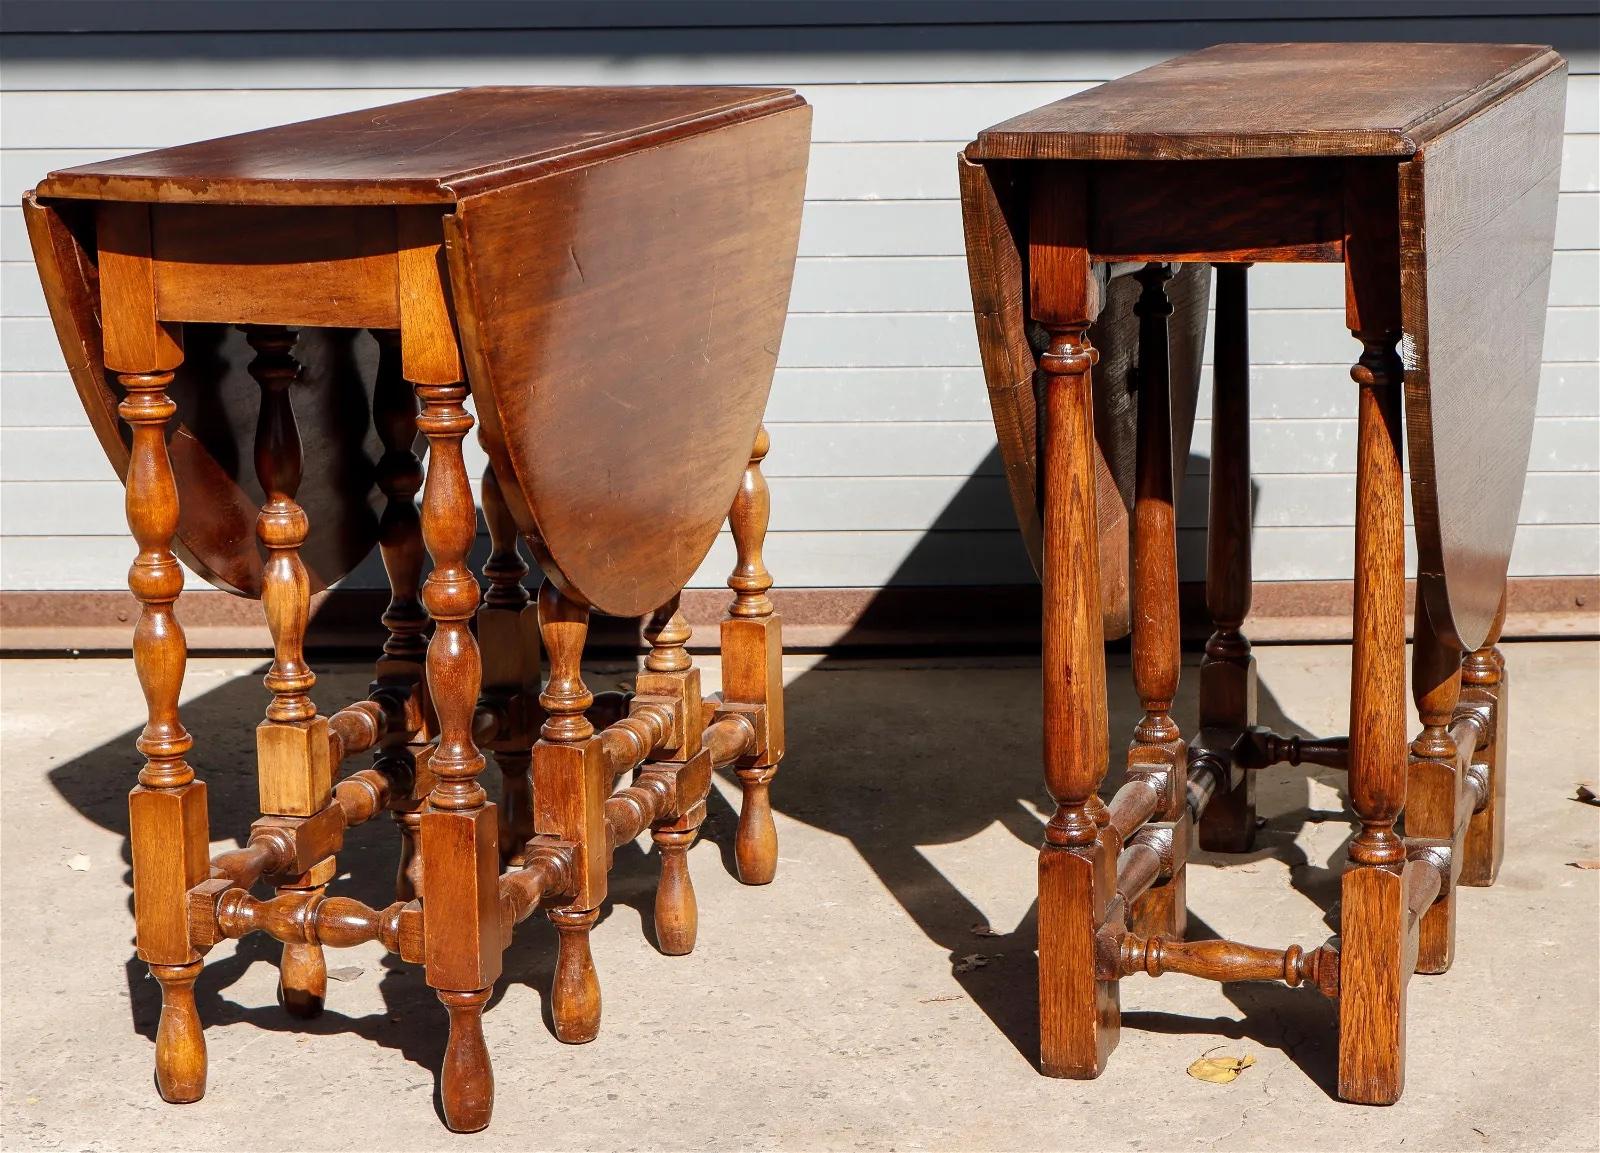 Two Antique English Dropleaf Gateleg tables. One Oak. One Walnut. 19th Century on an Early 18th Century Form.

One is 30